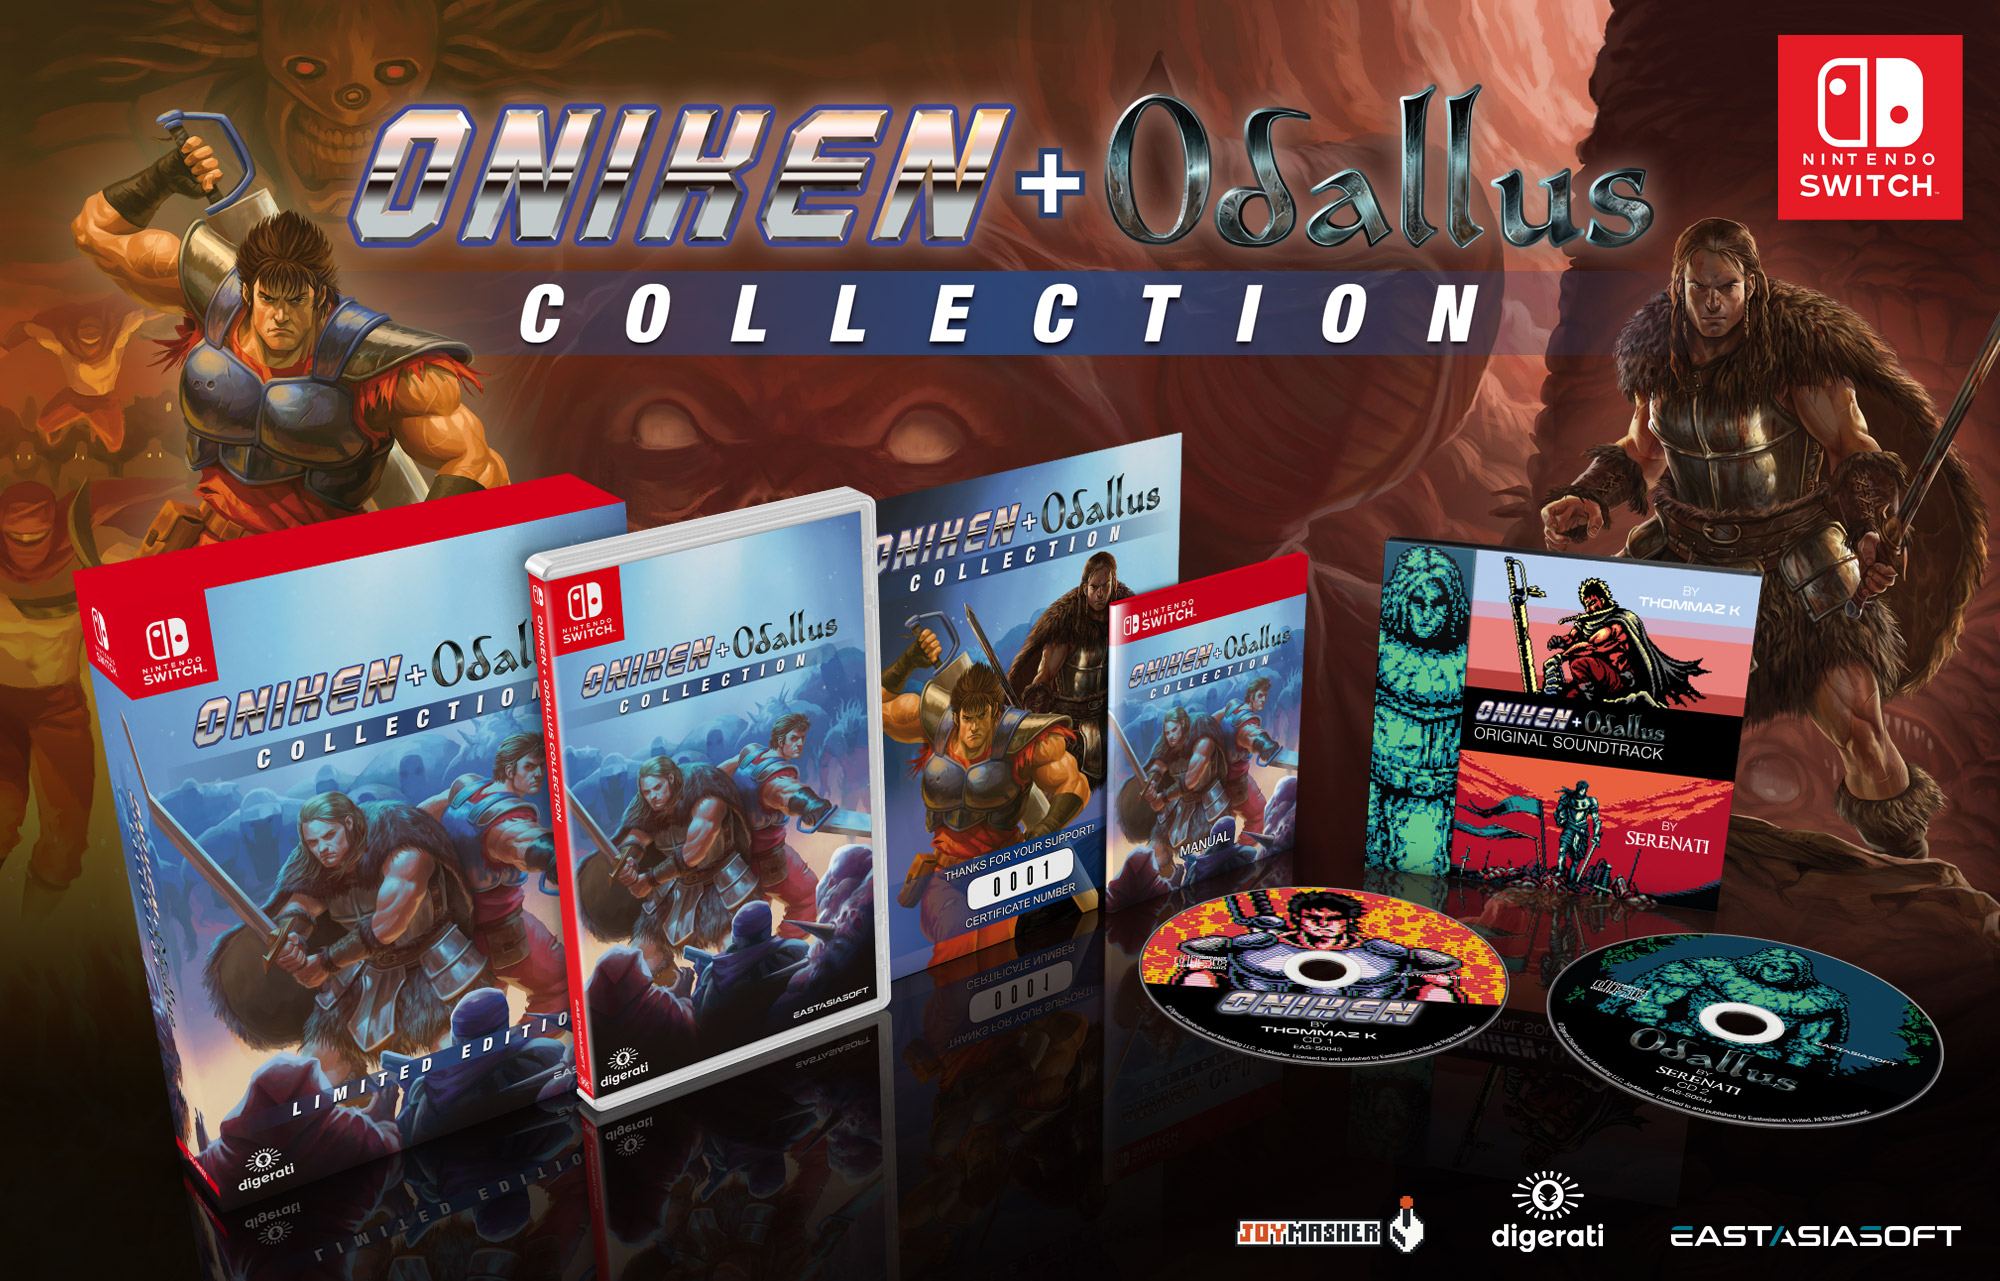 oniken-odallus-collection-limited-edition-583543.27.jpg